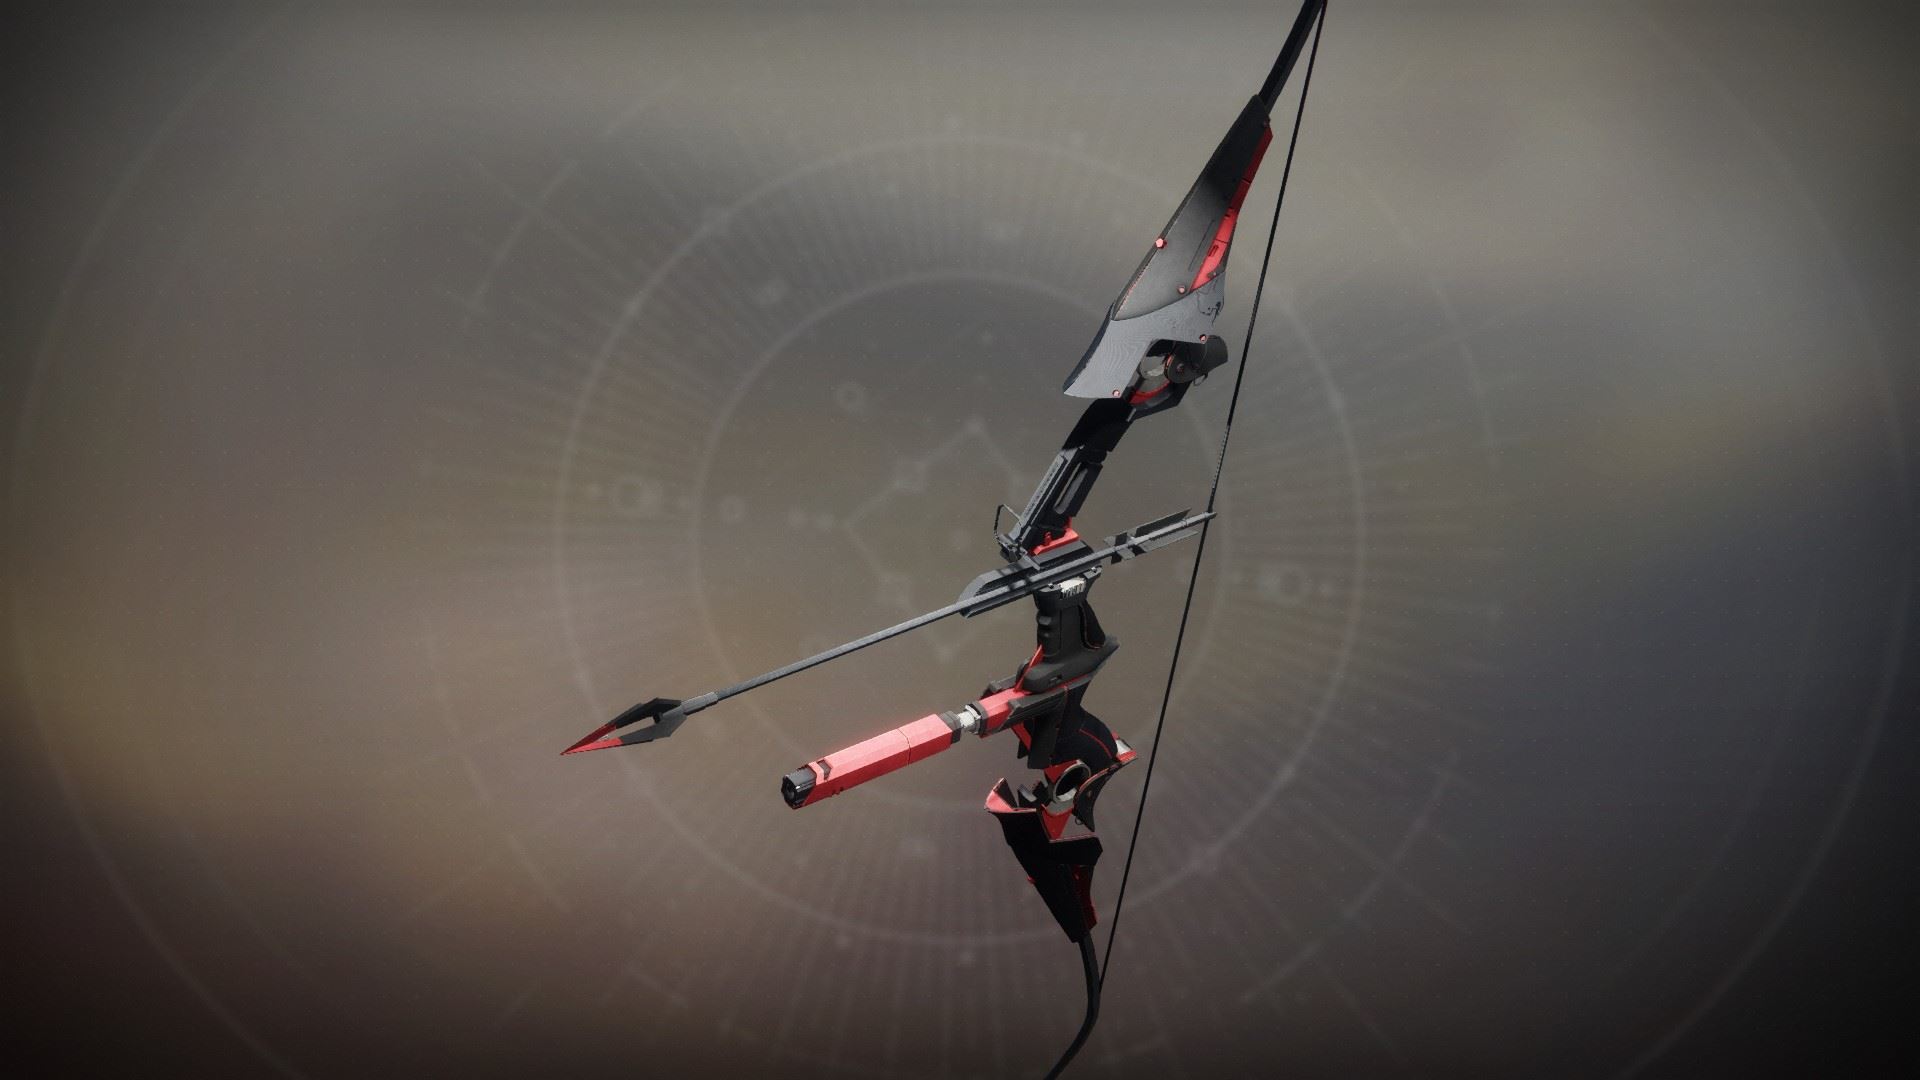 Weapons from Armory game screenshot